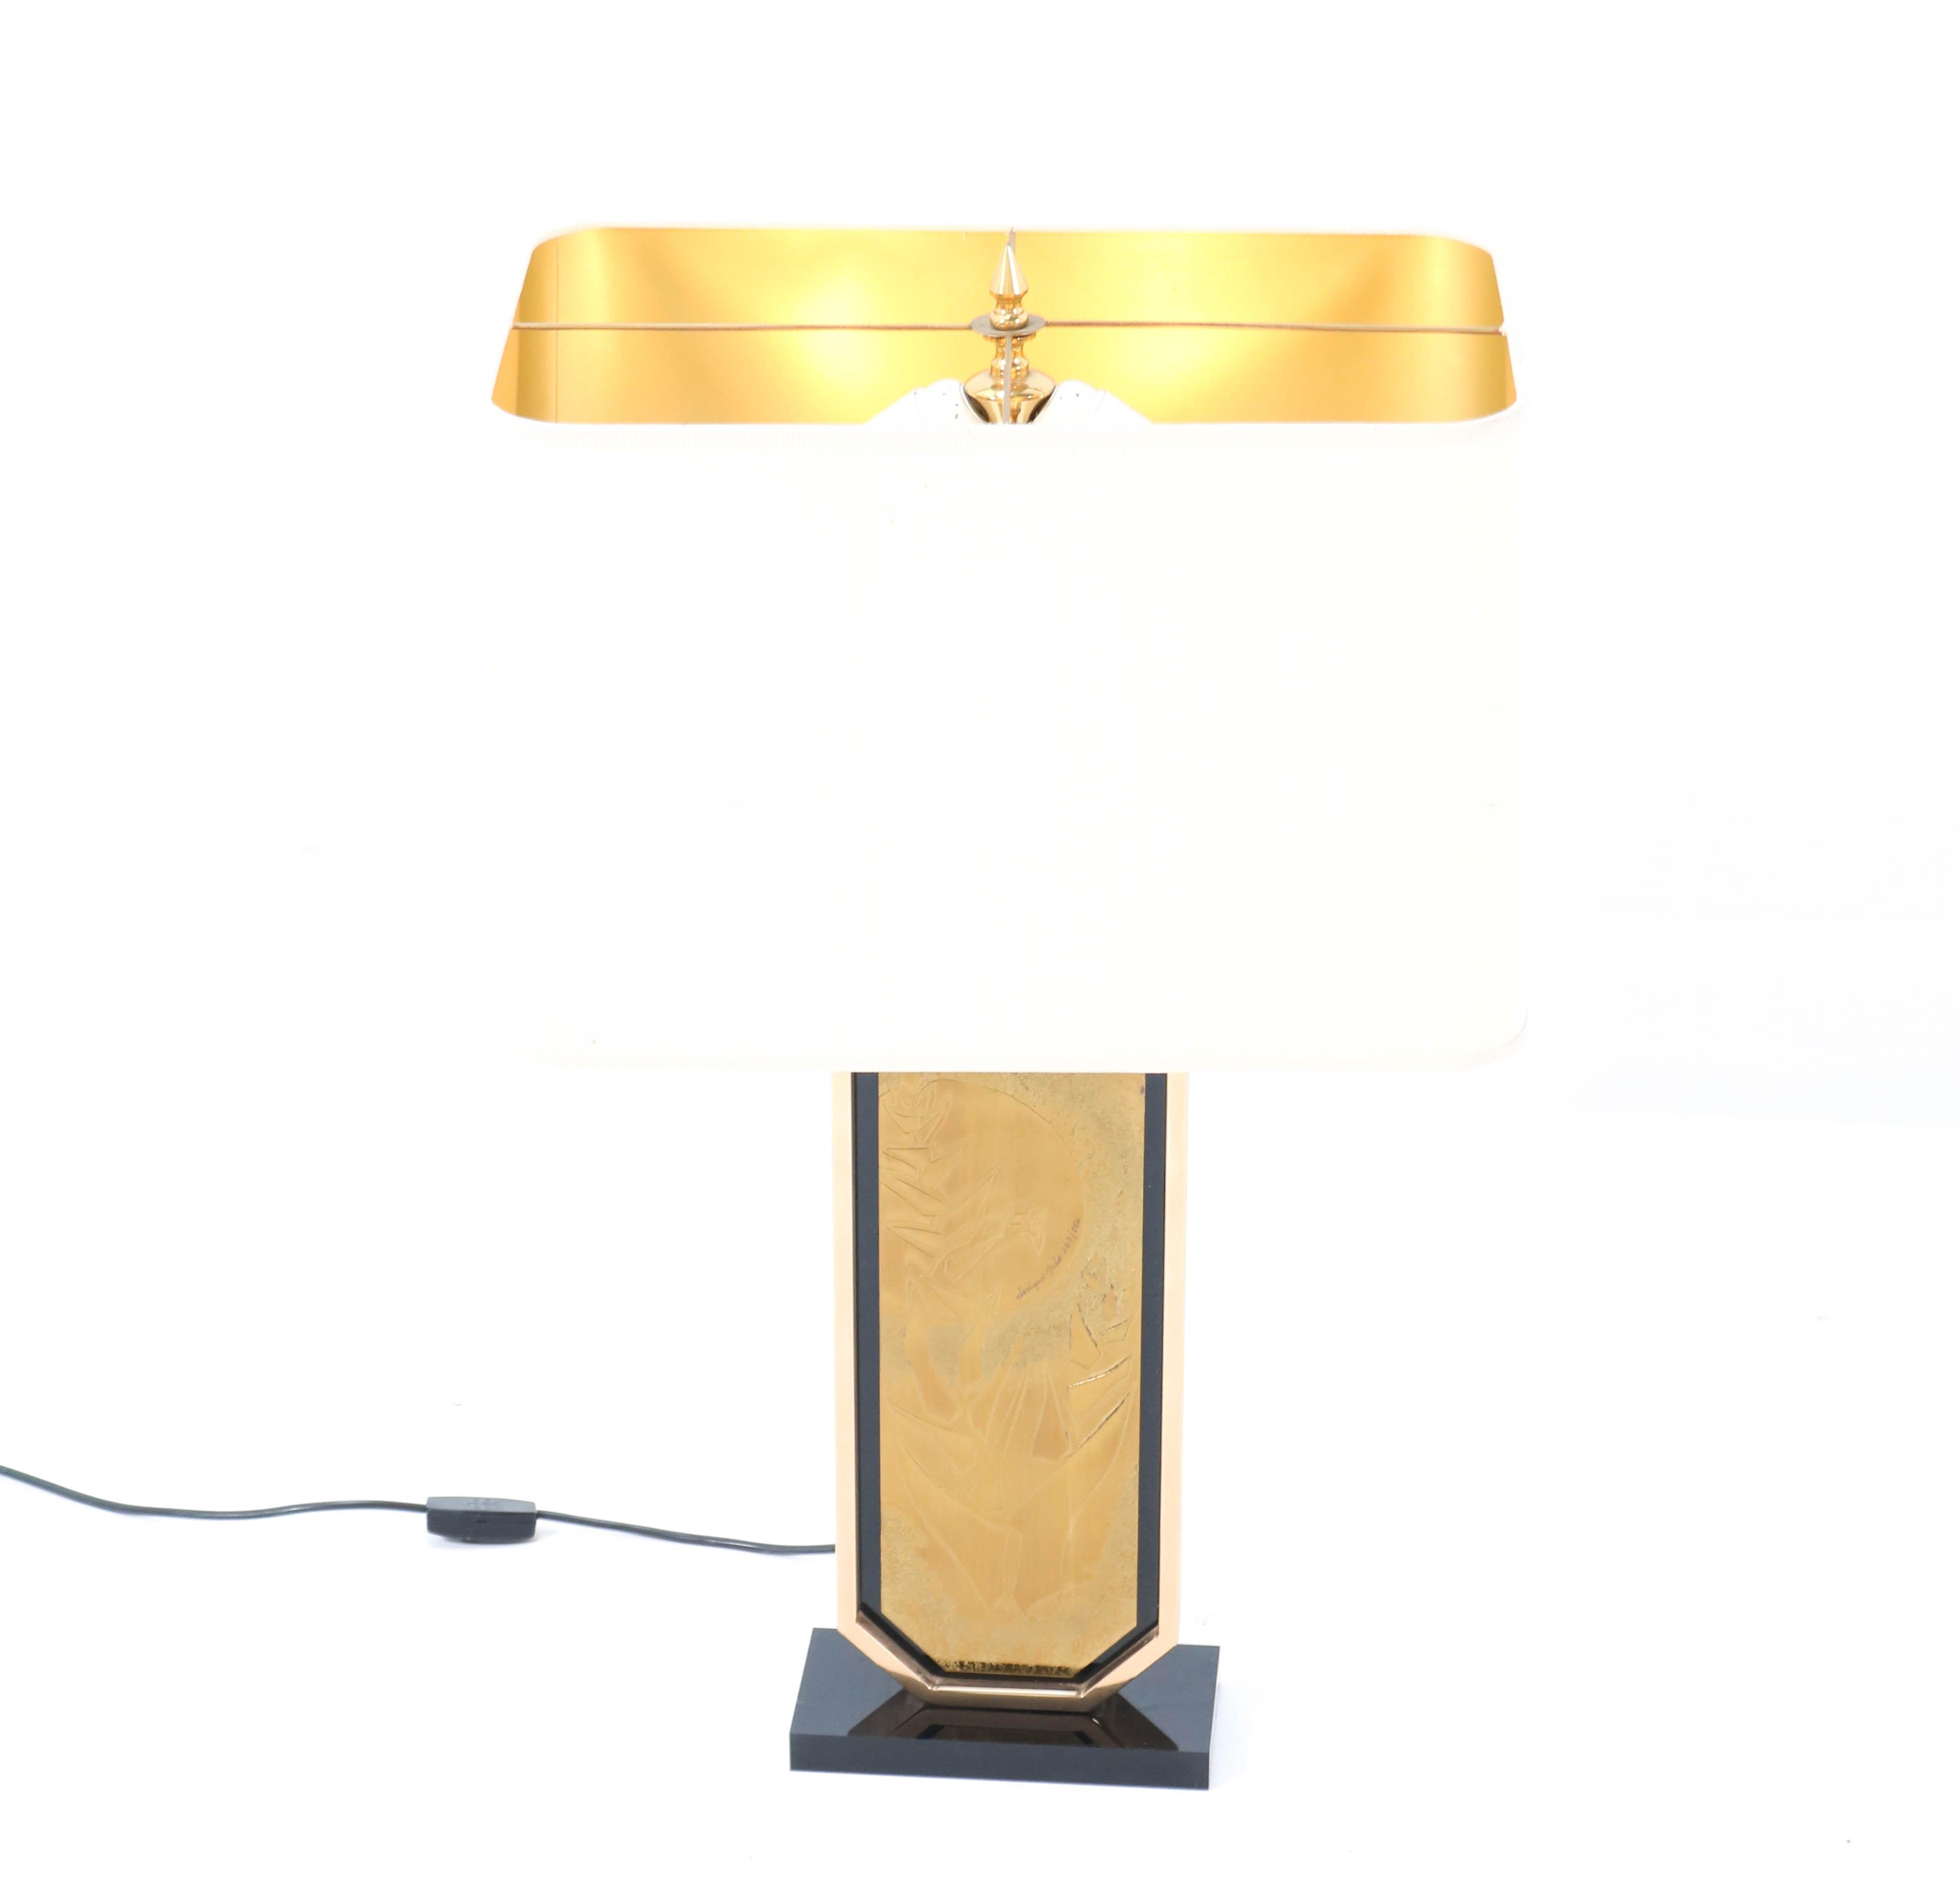 Wonderful Hollywood Regency table lamp.
Design by George Mathias for Designo Mahó.
Striking Belgium design from the 1970s.
Gold plated etched brass base with black lucite details.
Original shade.
Marked and numbered 167/250.
In very good